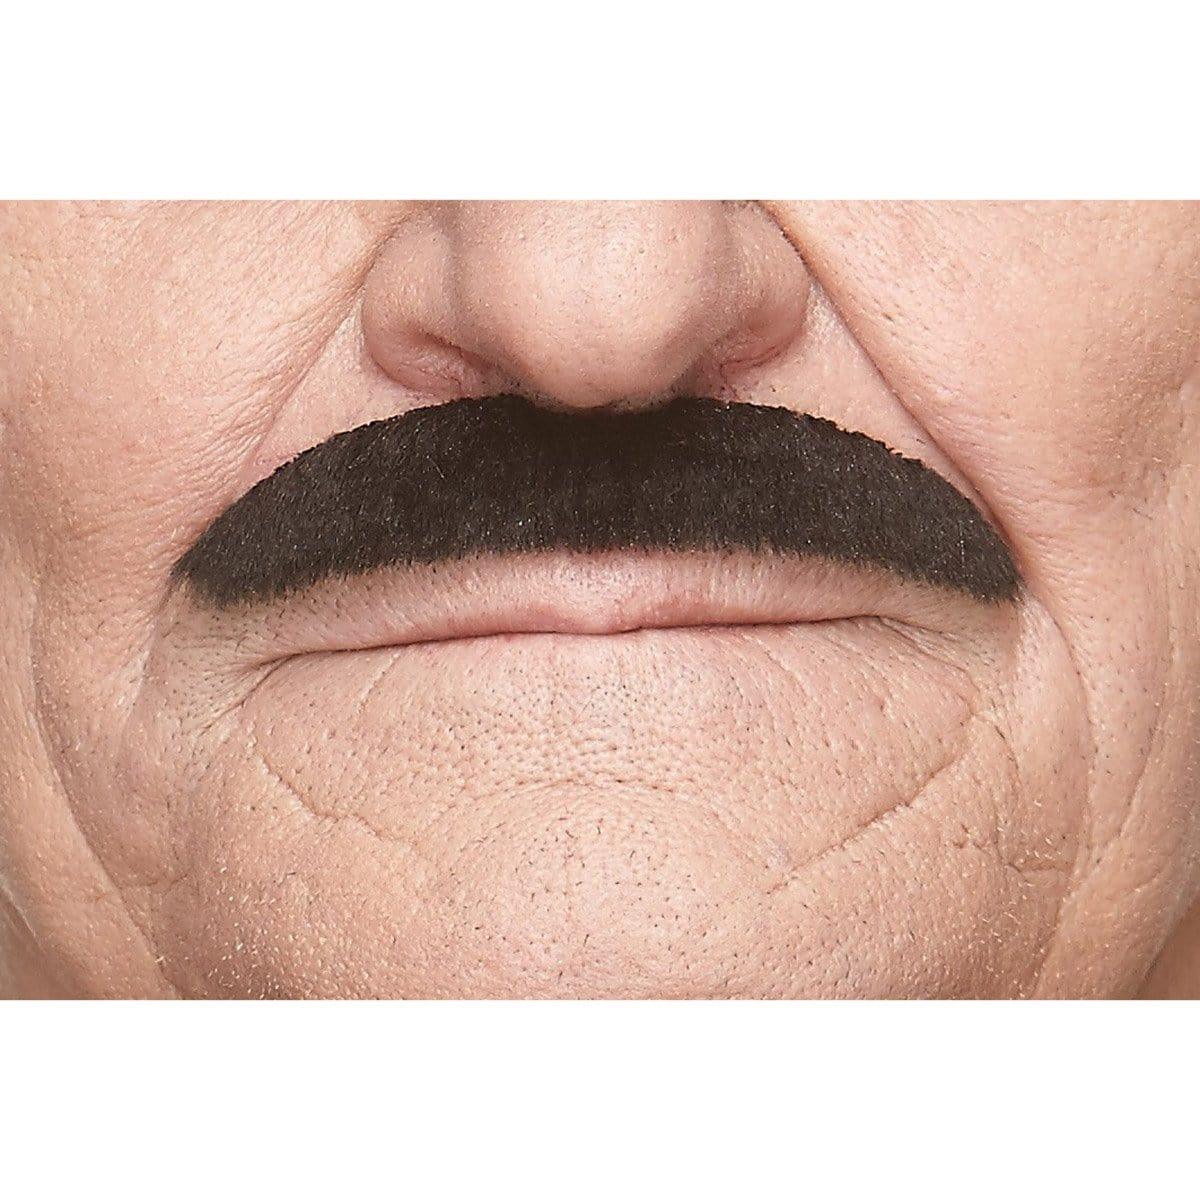 Buy Costume Accessories Black Monsieur mustache sold at Party Expert